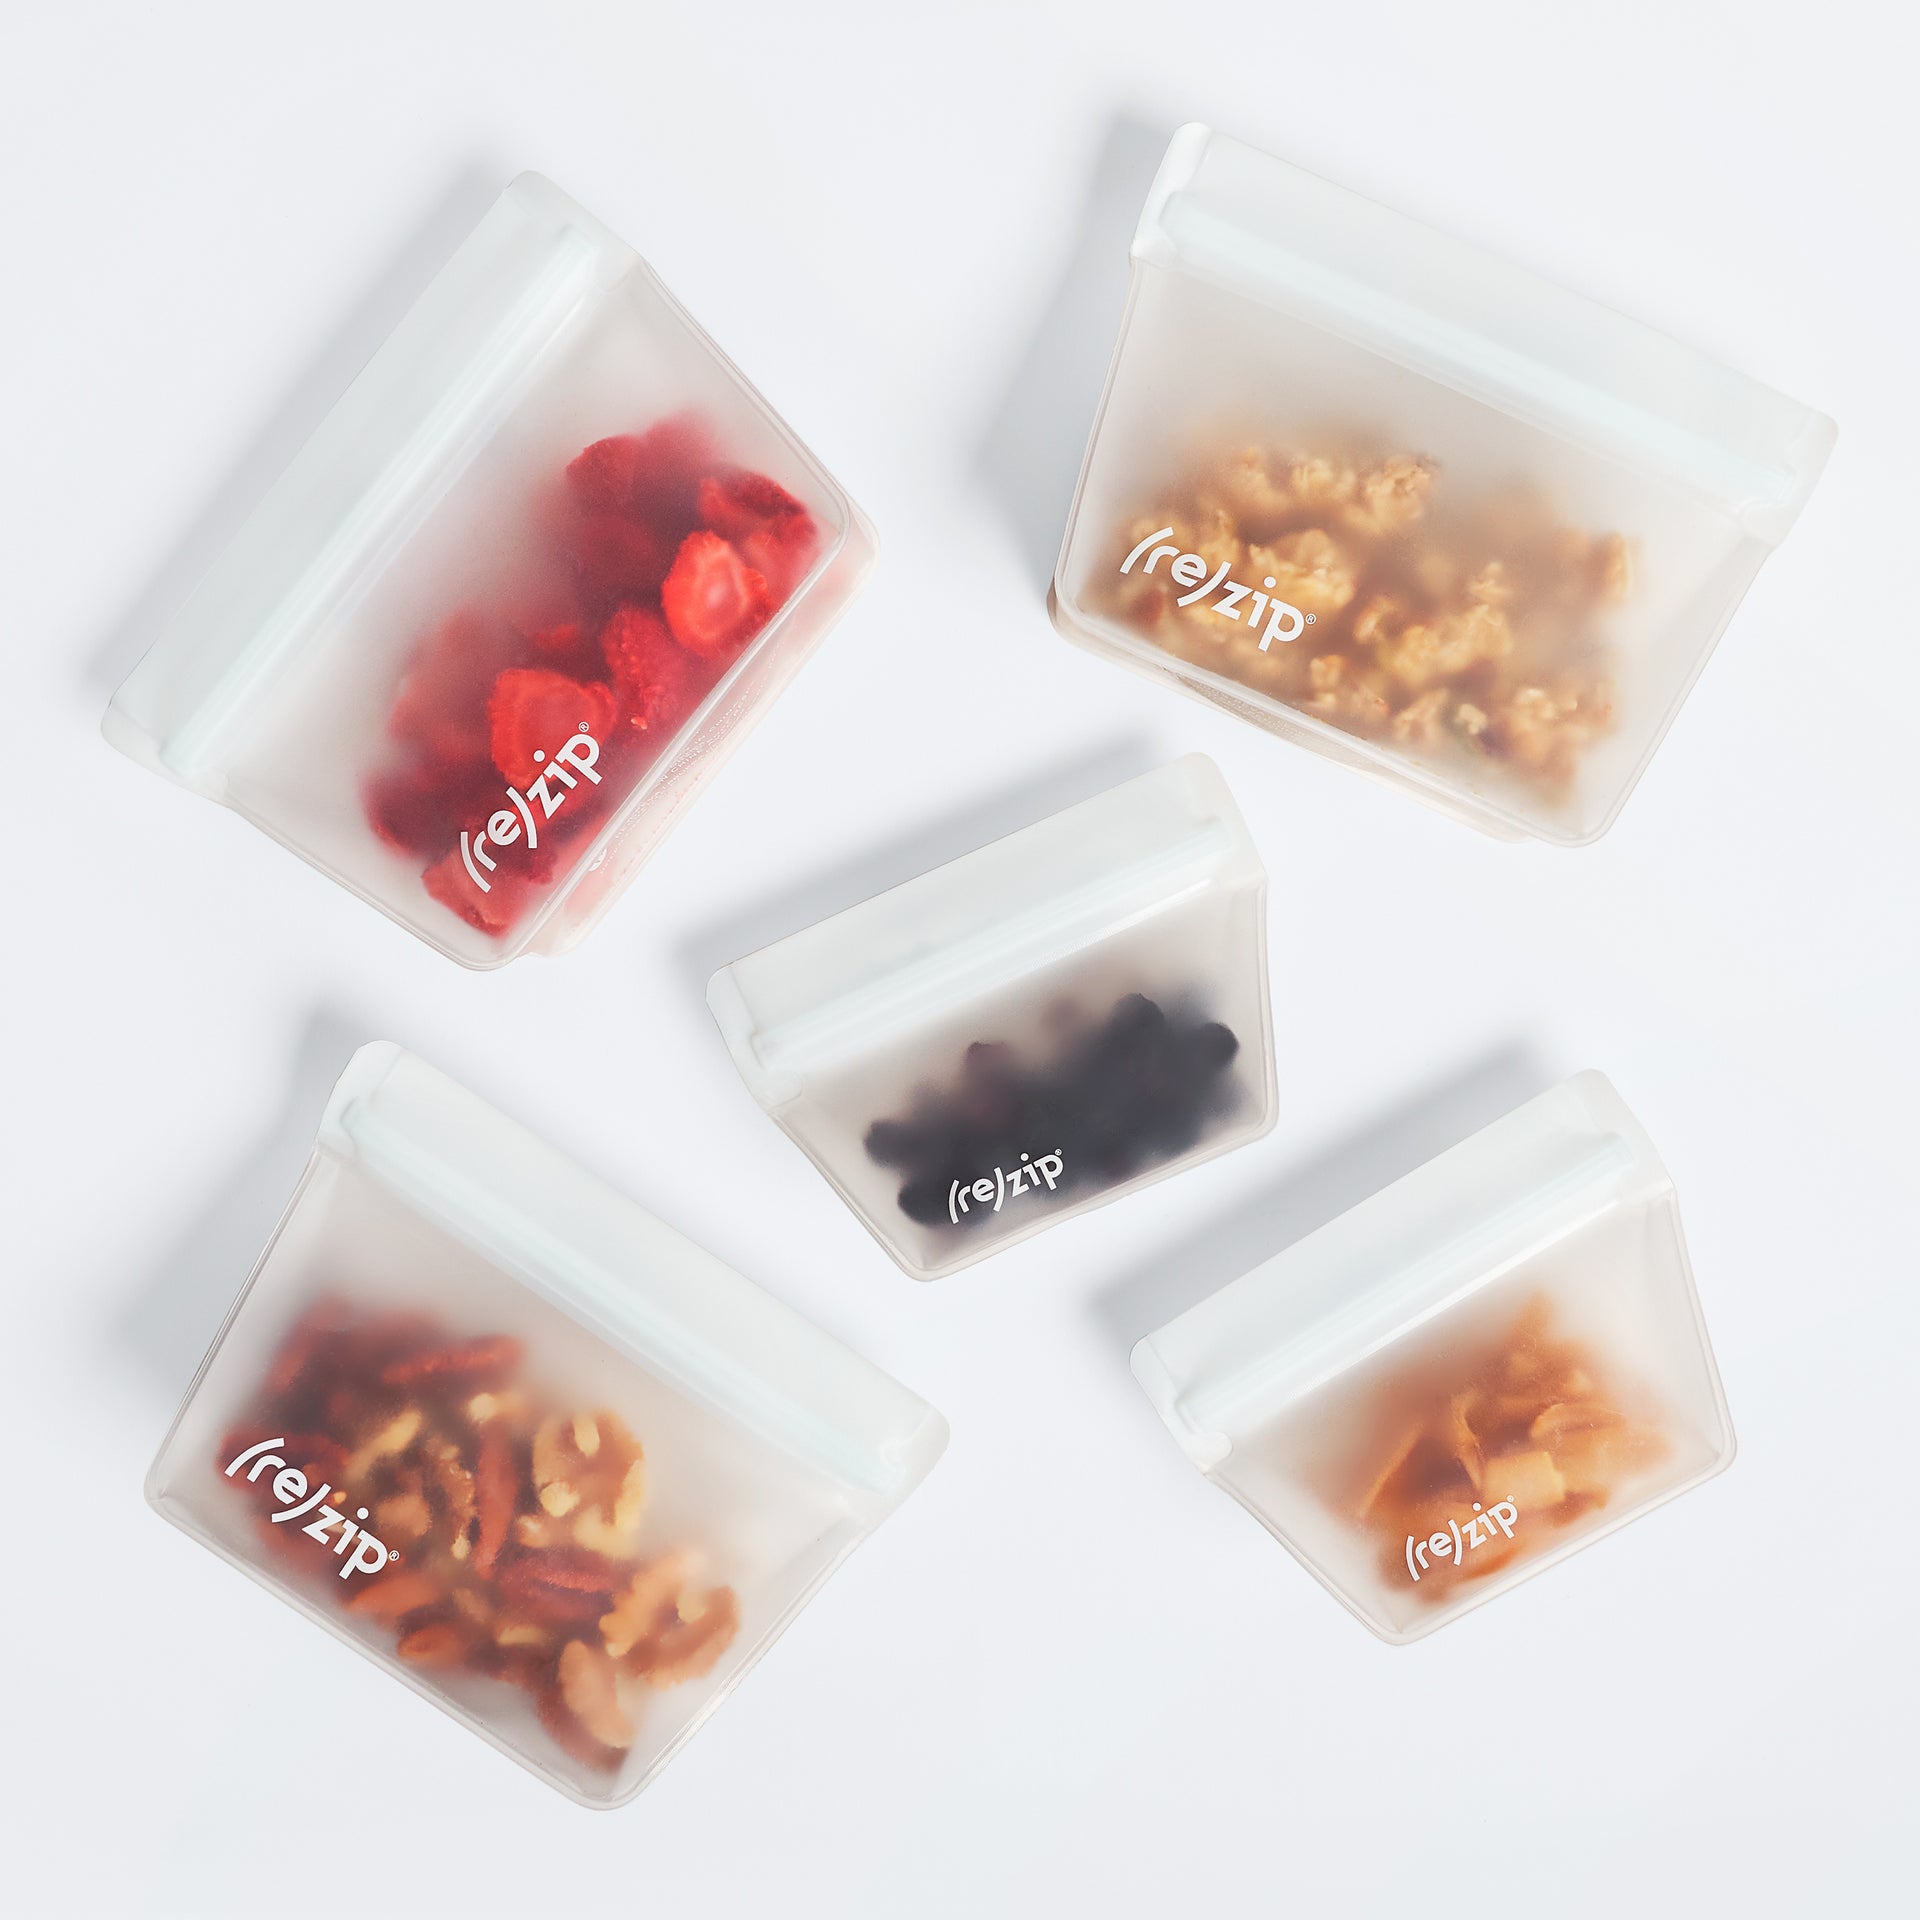  Ziploc Snack Bags, Storage Bags for On the Go